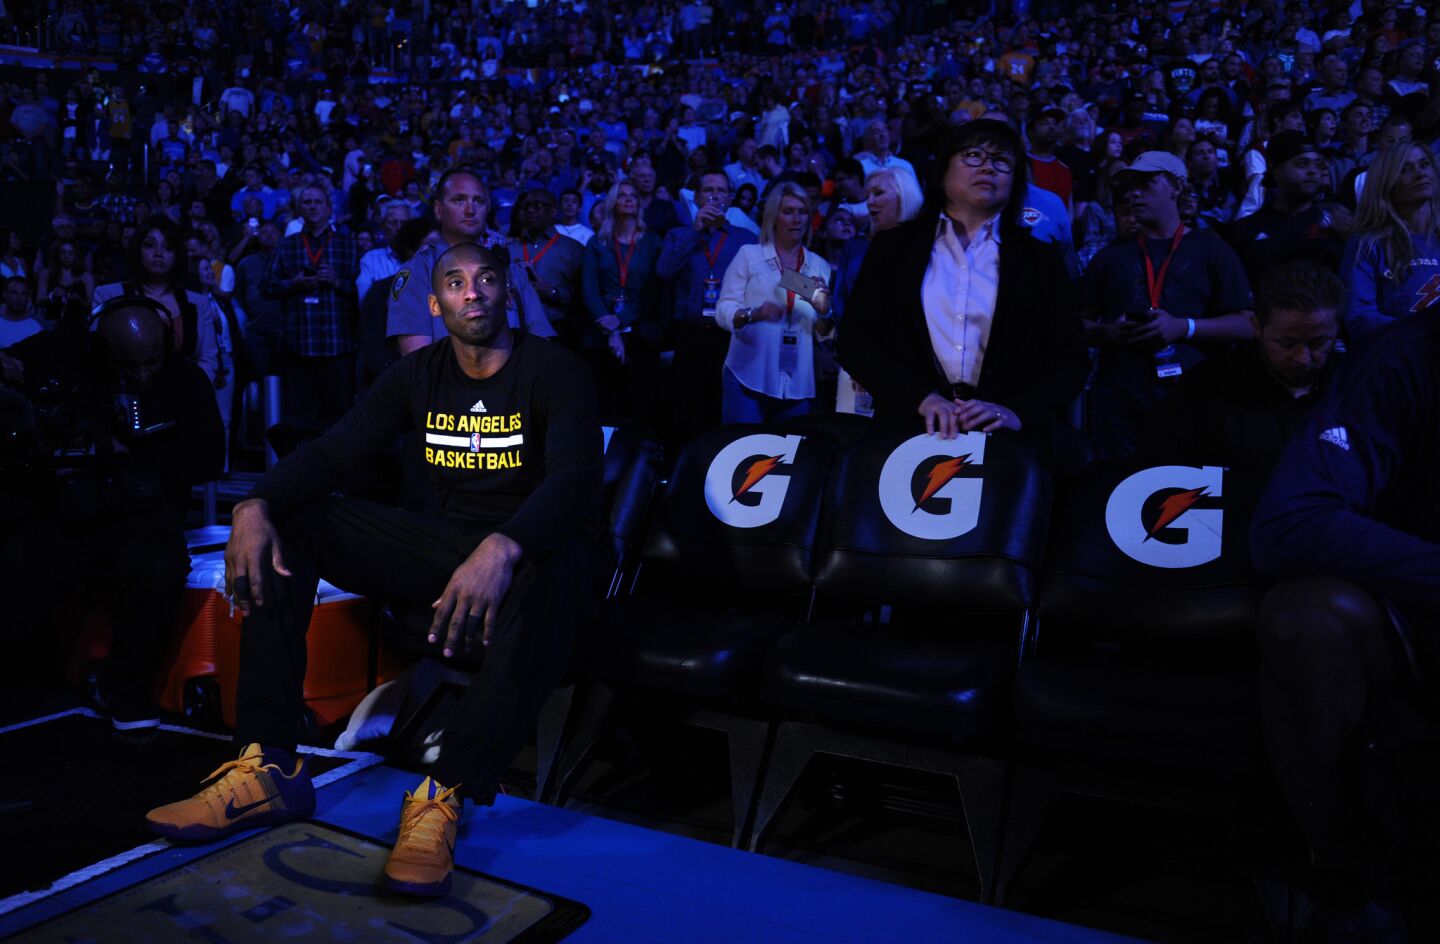 Kobe Bryant watches introductions from the bench before a game against the Thunder in Oklahoma City on April 11.